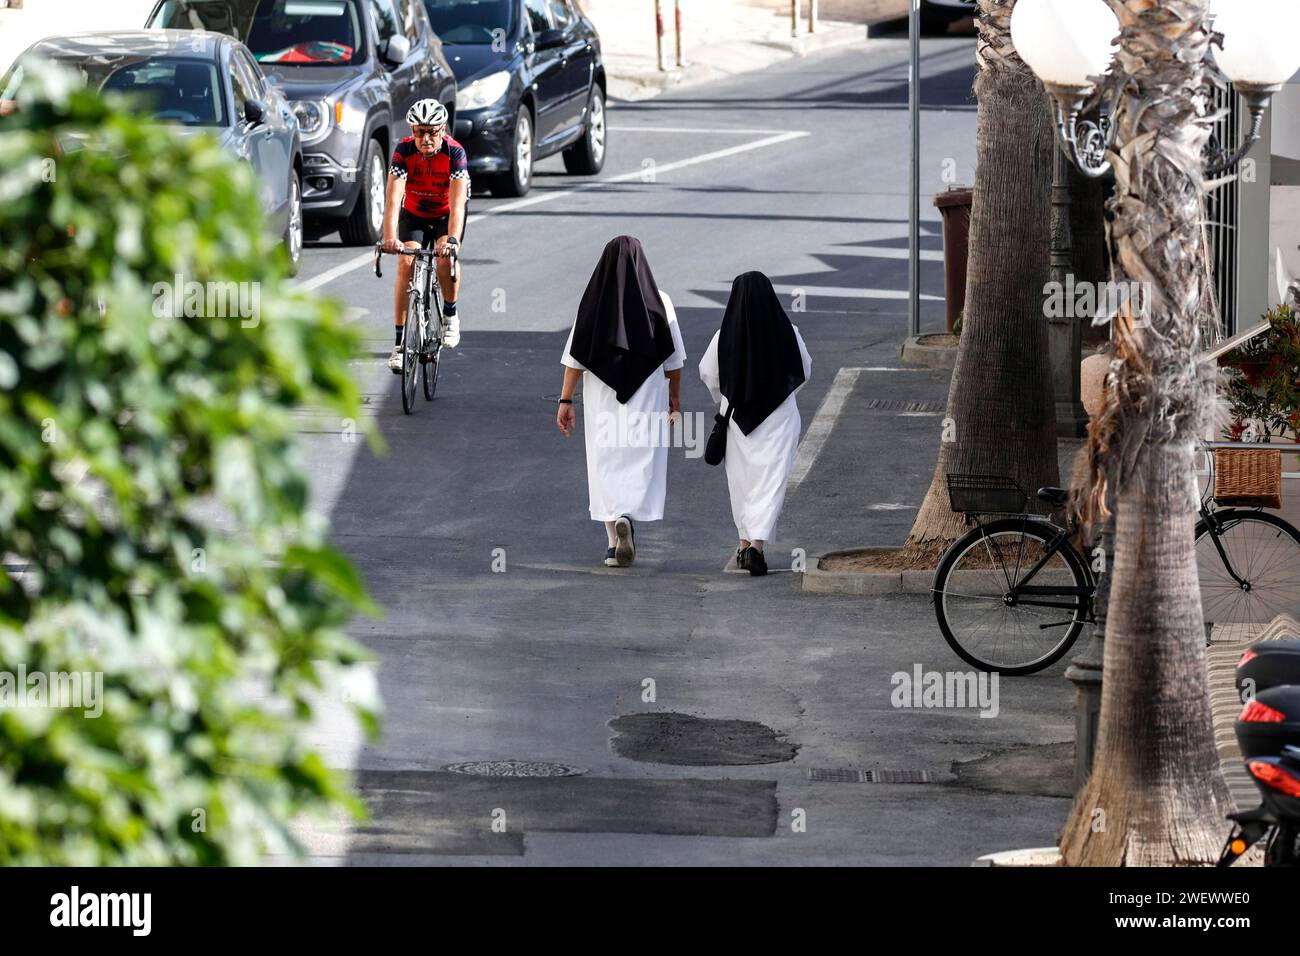 Two nuns walk across a street in Diana Marina, a man on a racing bike rides past, 28/05/2022 Stock Photo